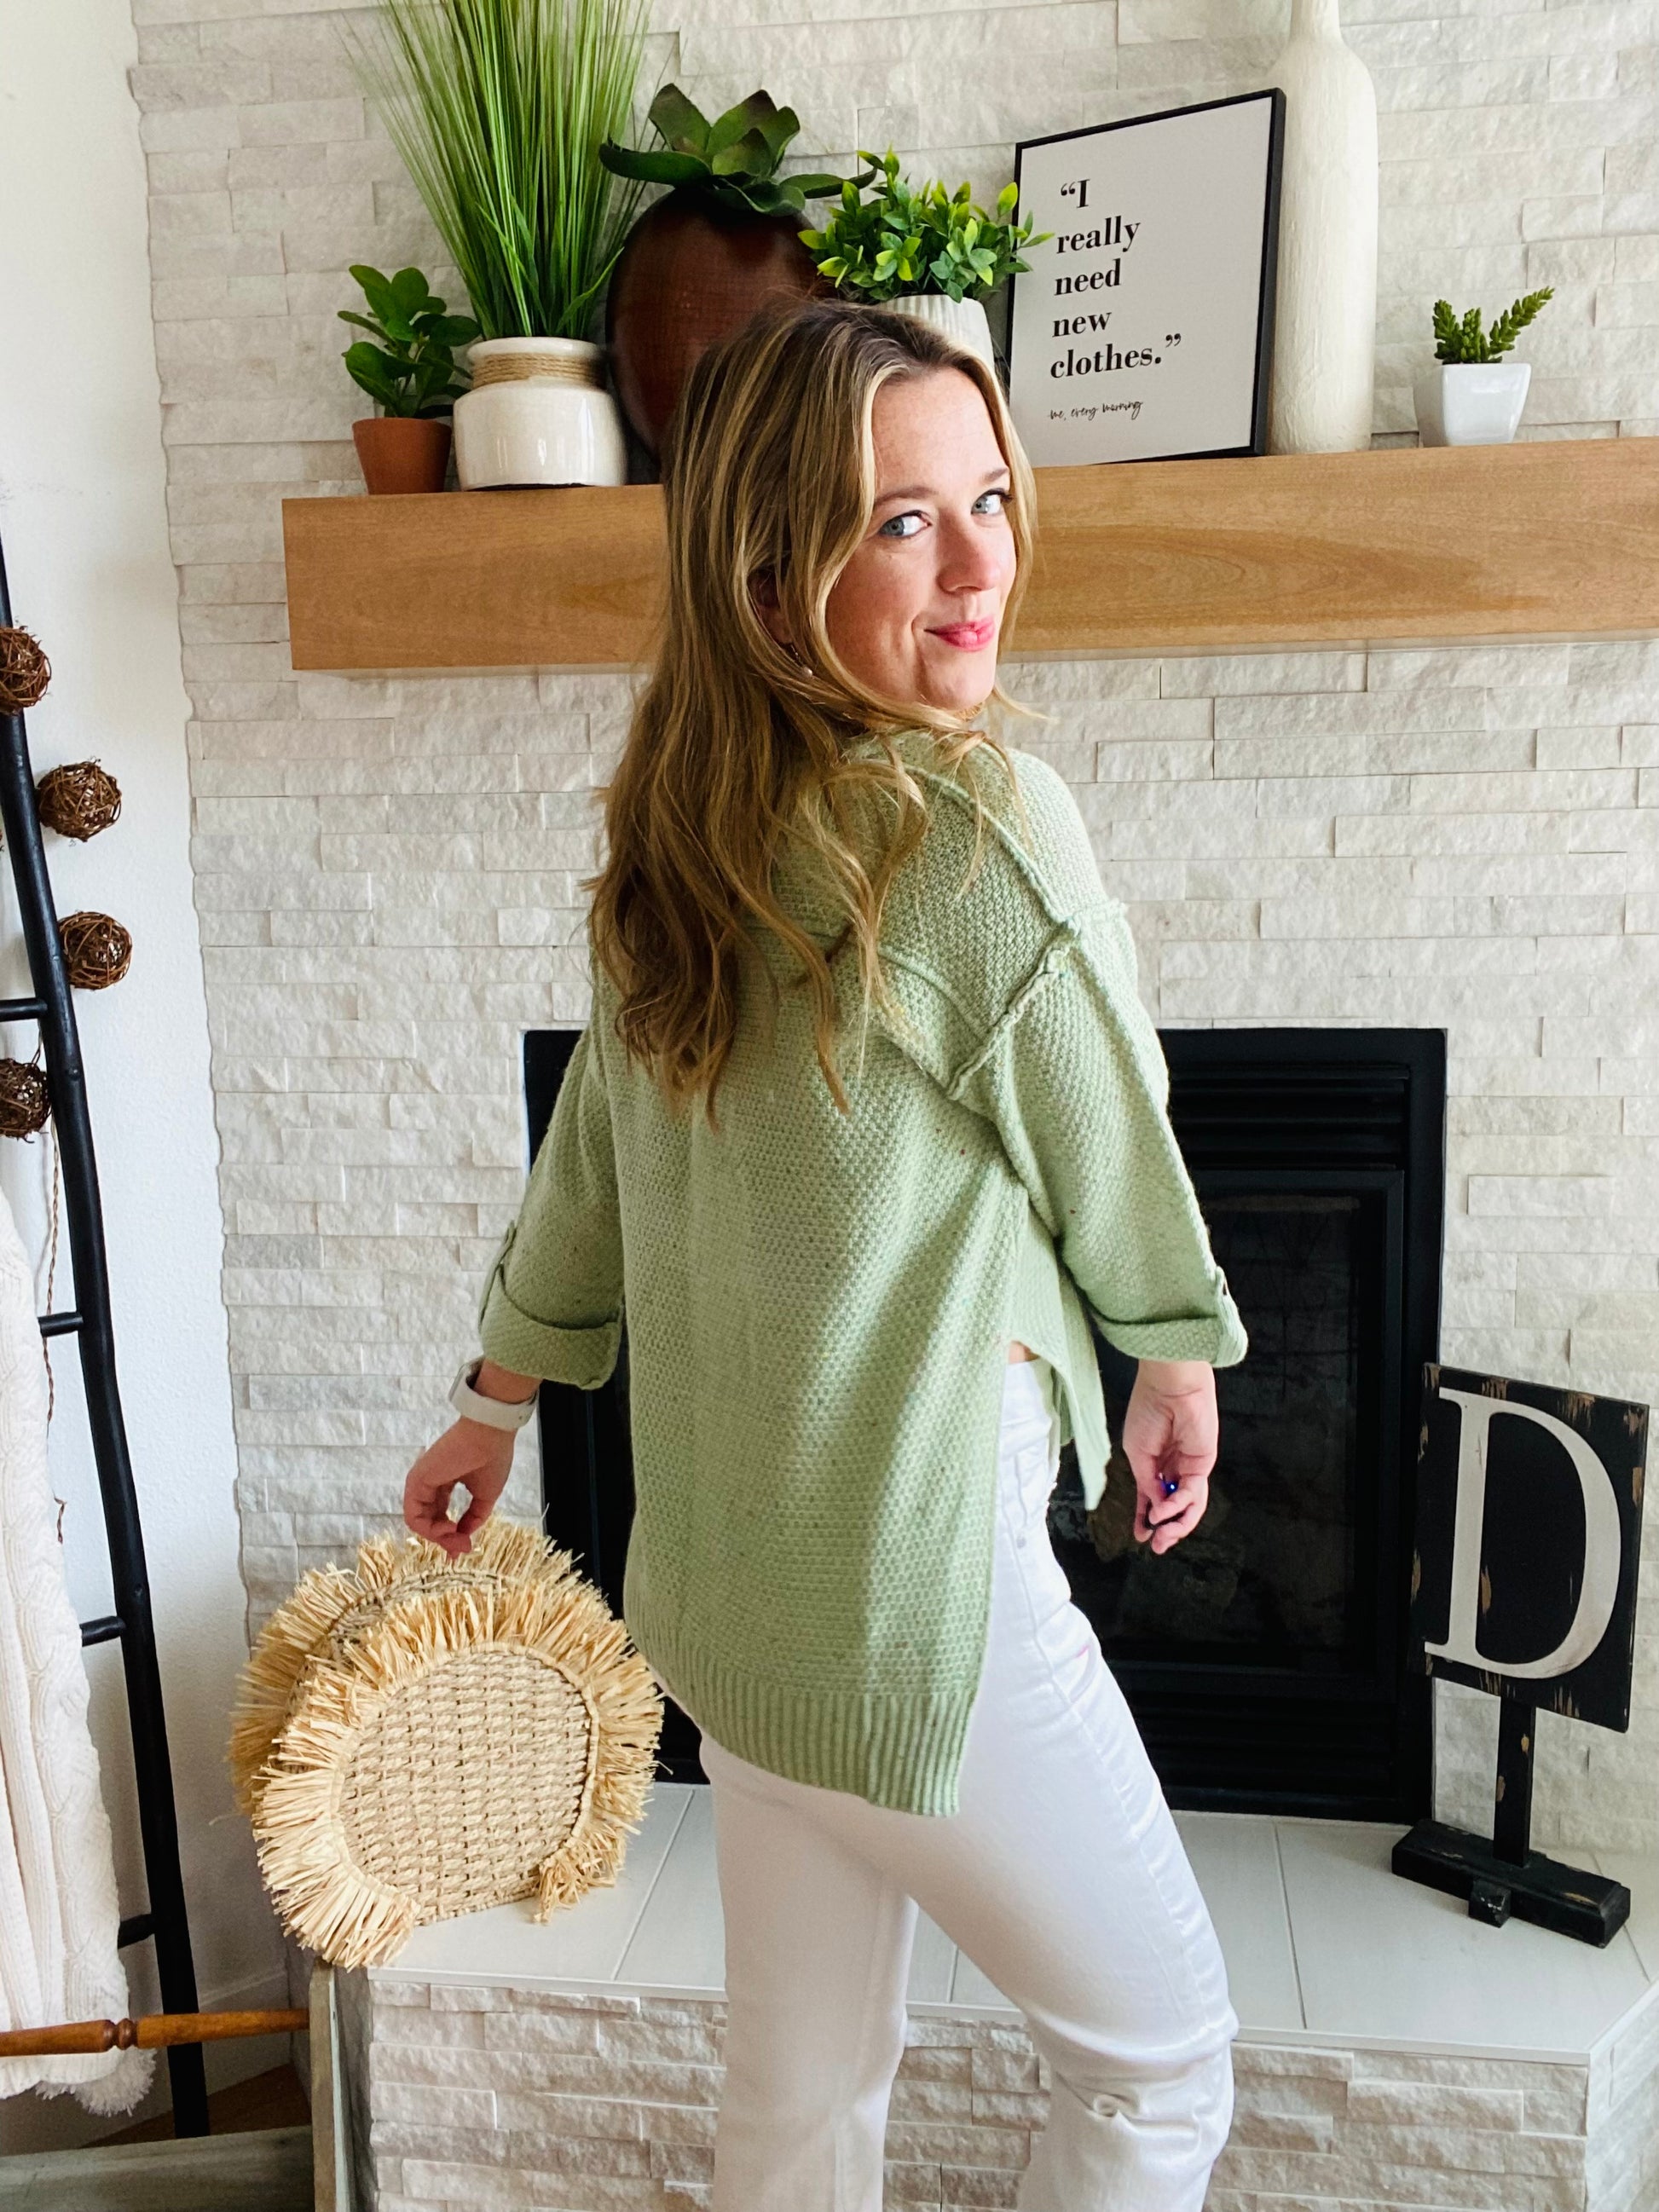 Our Green Button Confetti Sweater is the perfect statement piece this season. It features striking flecks of color in the fabric, a rolled up sleeve with button detailing, and a slightly oversized fit. With a versatile design, this sweater pairs easily with white denim for a unique, stylistic look.